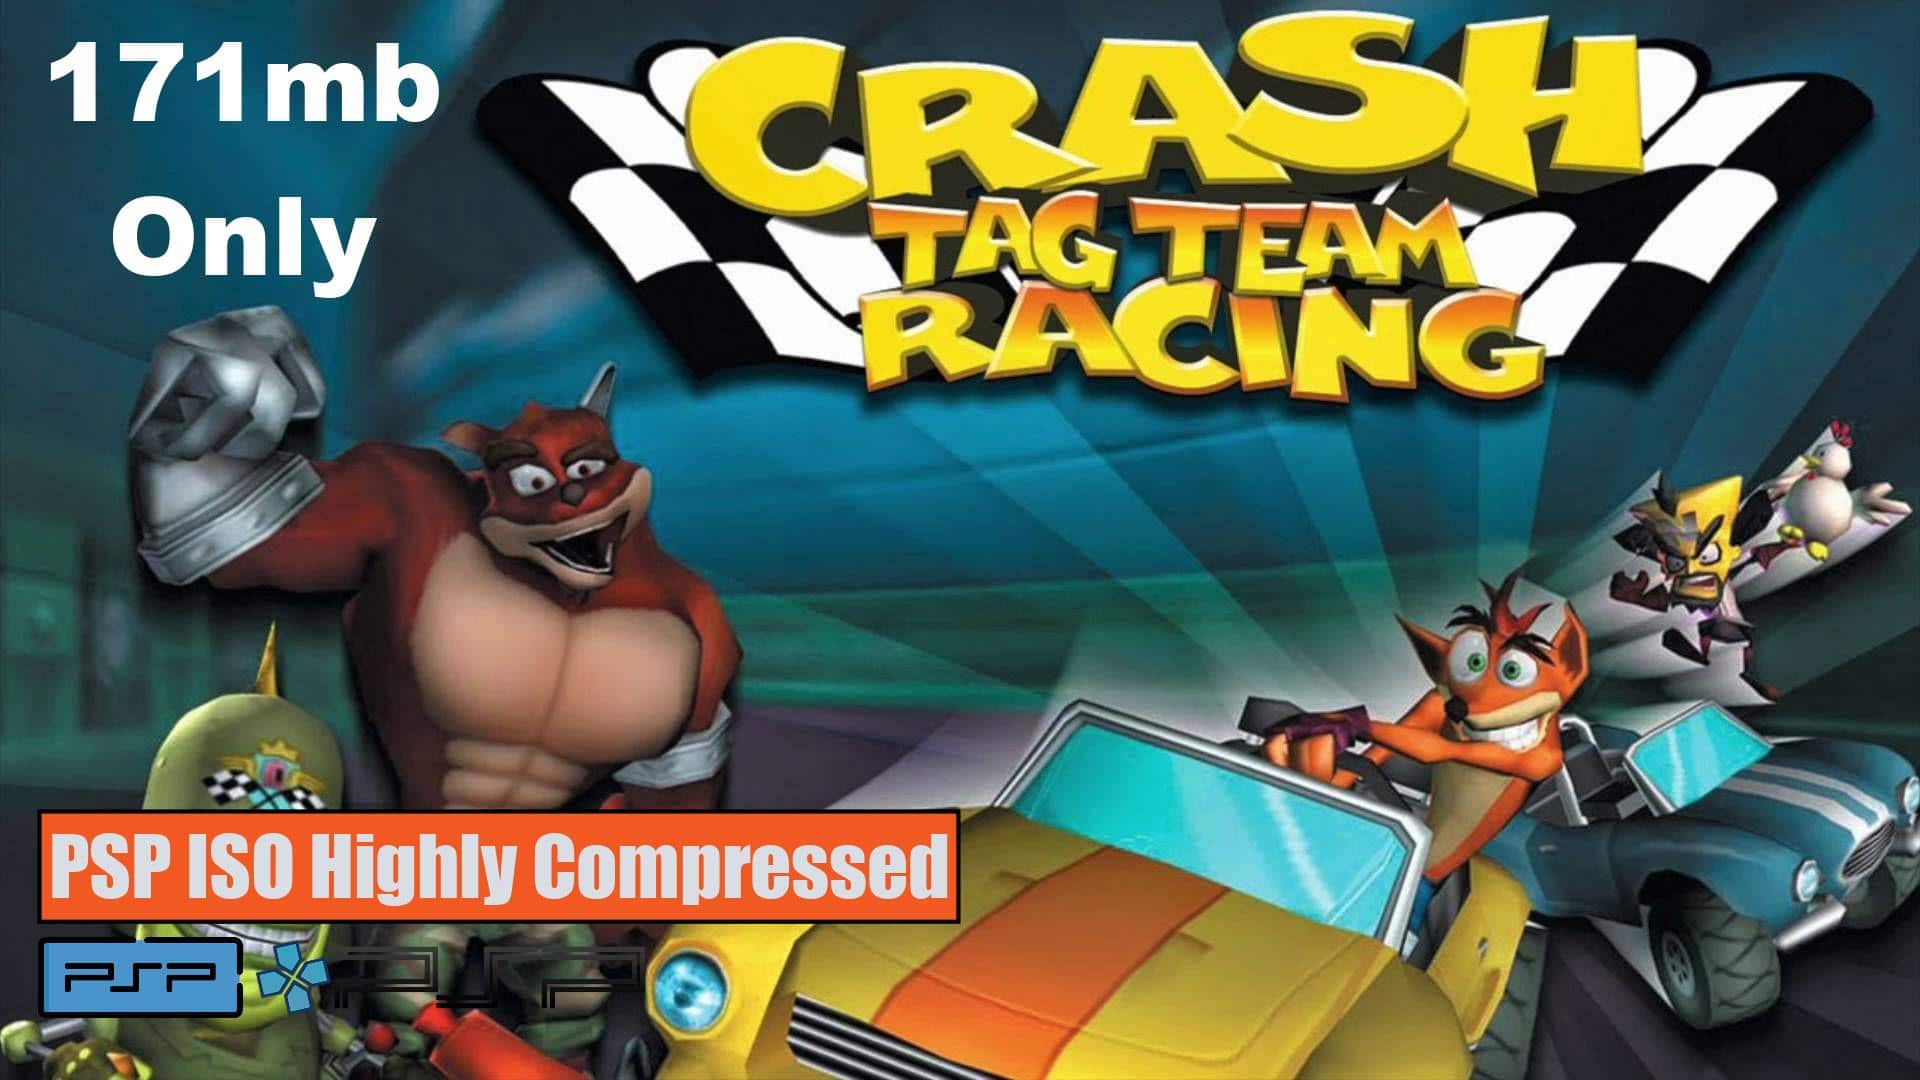 Crash Tag Team Racing PSP ISO Highly Compressed